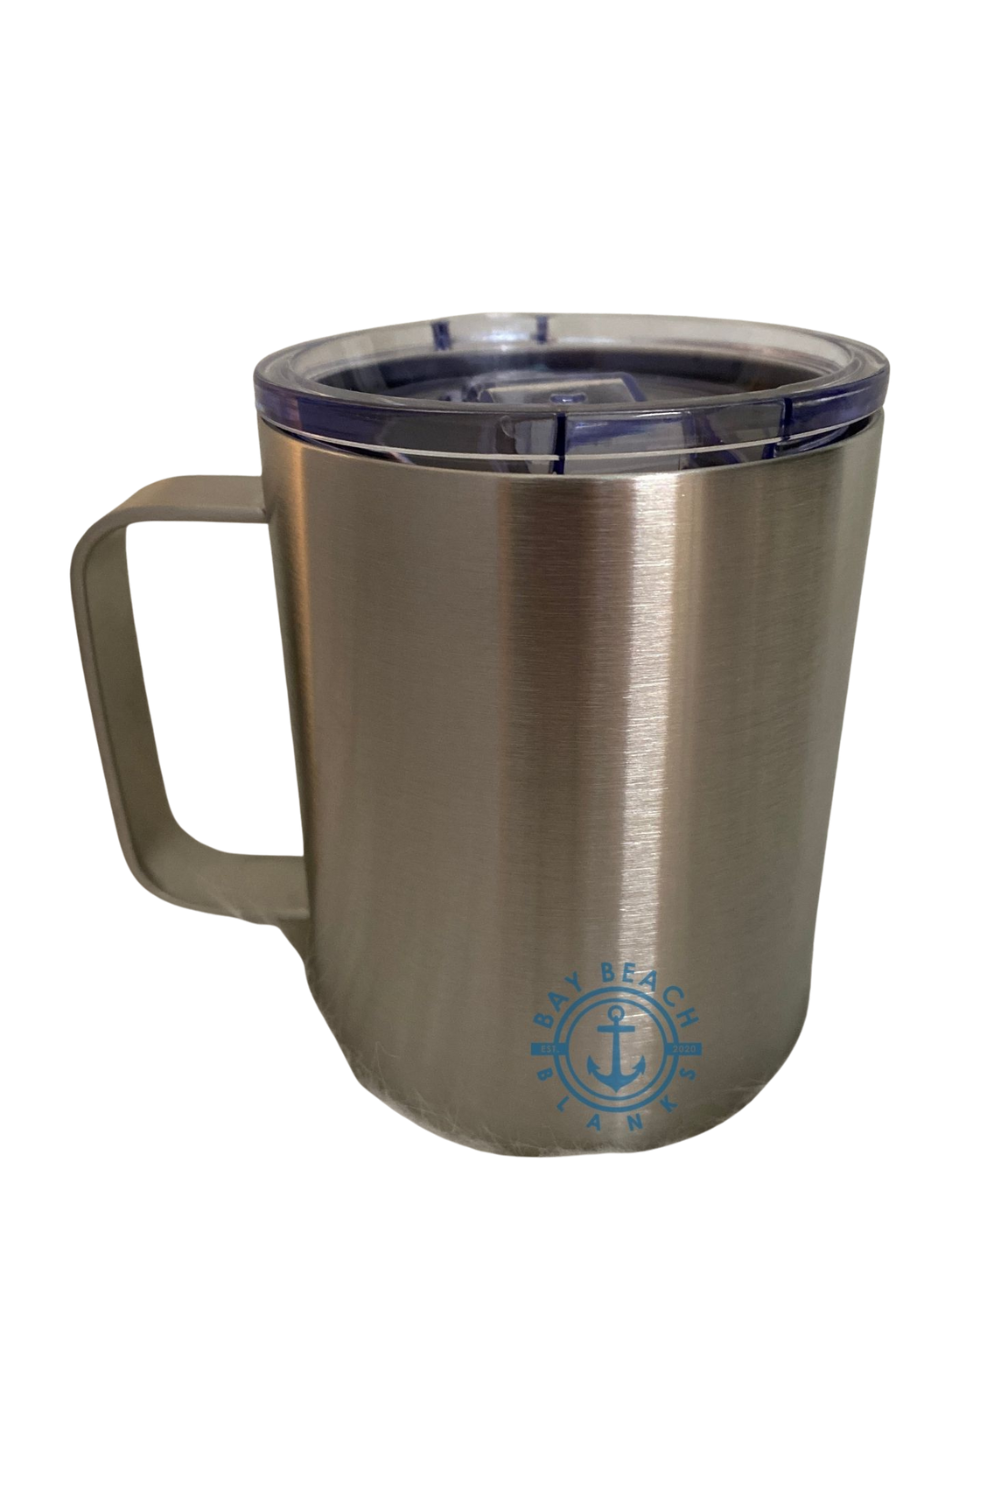 12 oz double wall insulated stainless steel Coffee Mug (Camp Mug) comes with a leakproof sliding lid with square handle. - Bay Beach Blanks